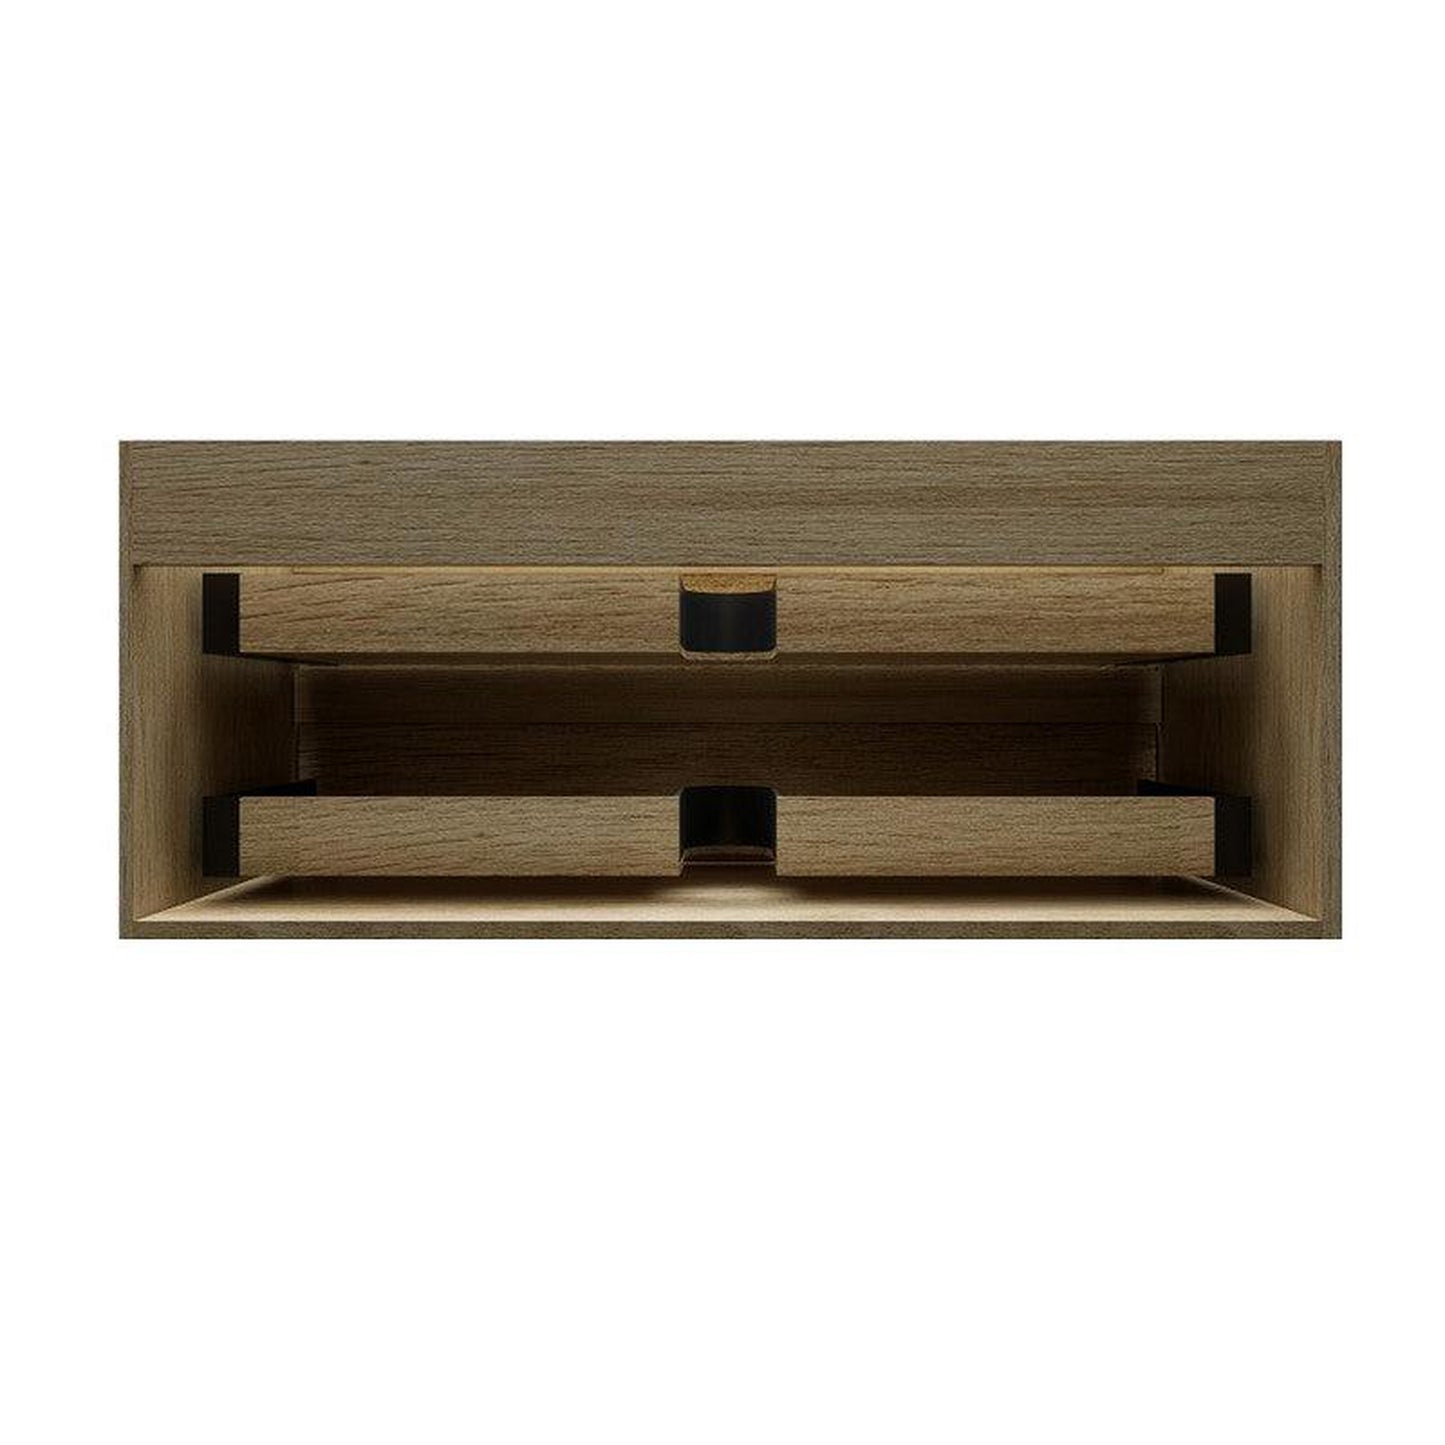 Moreno Bath MAX 48" Coffee Wood Wall-Mounted Vanity With Single Reinforced White Acrylic Sink